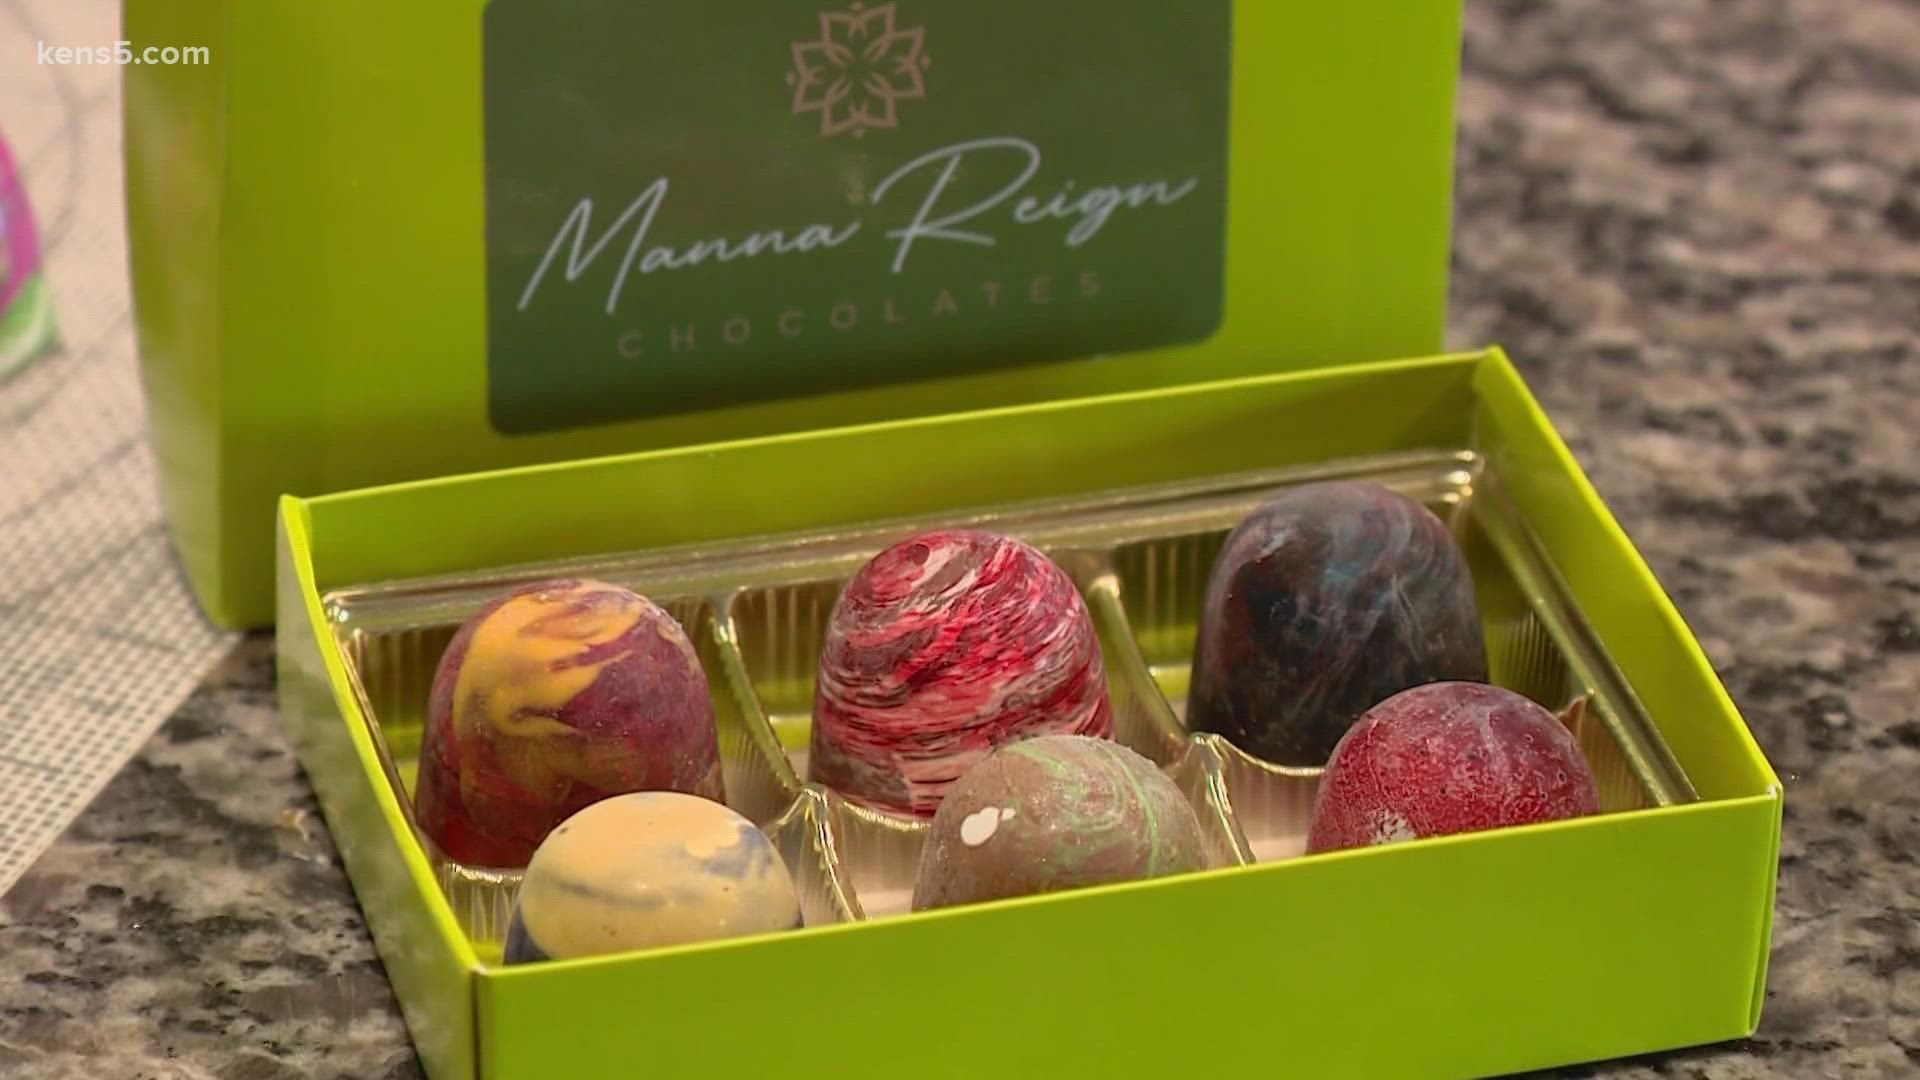 Montina Cleveland started Manna Reign Chocolates two years ago after feeling inspired by her faith.